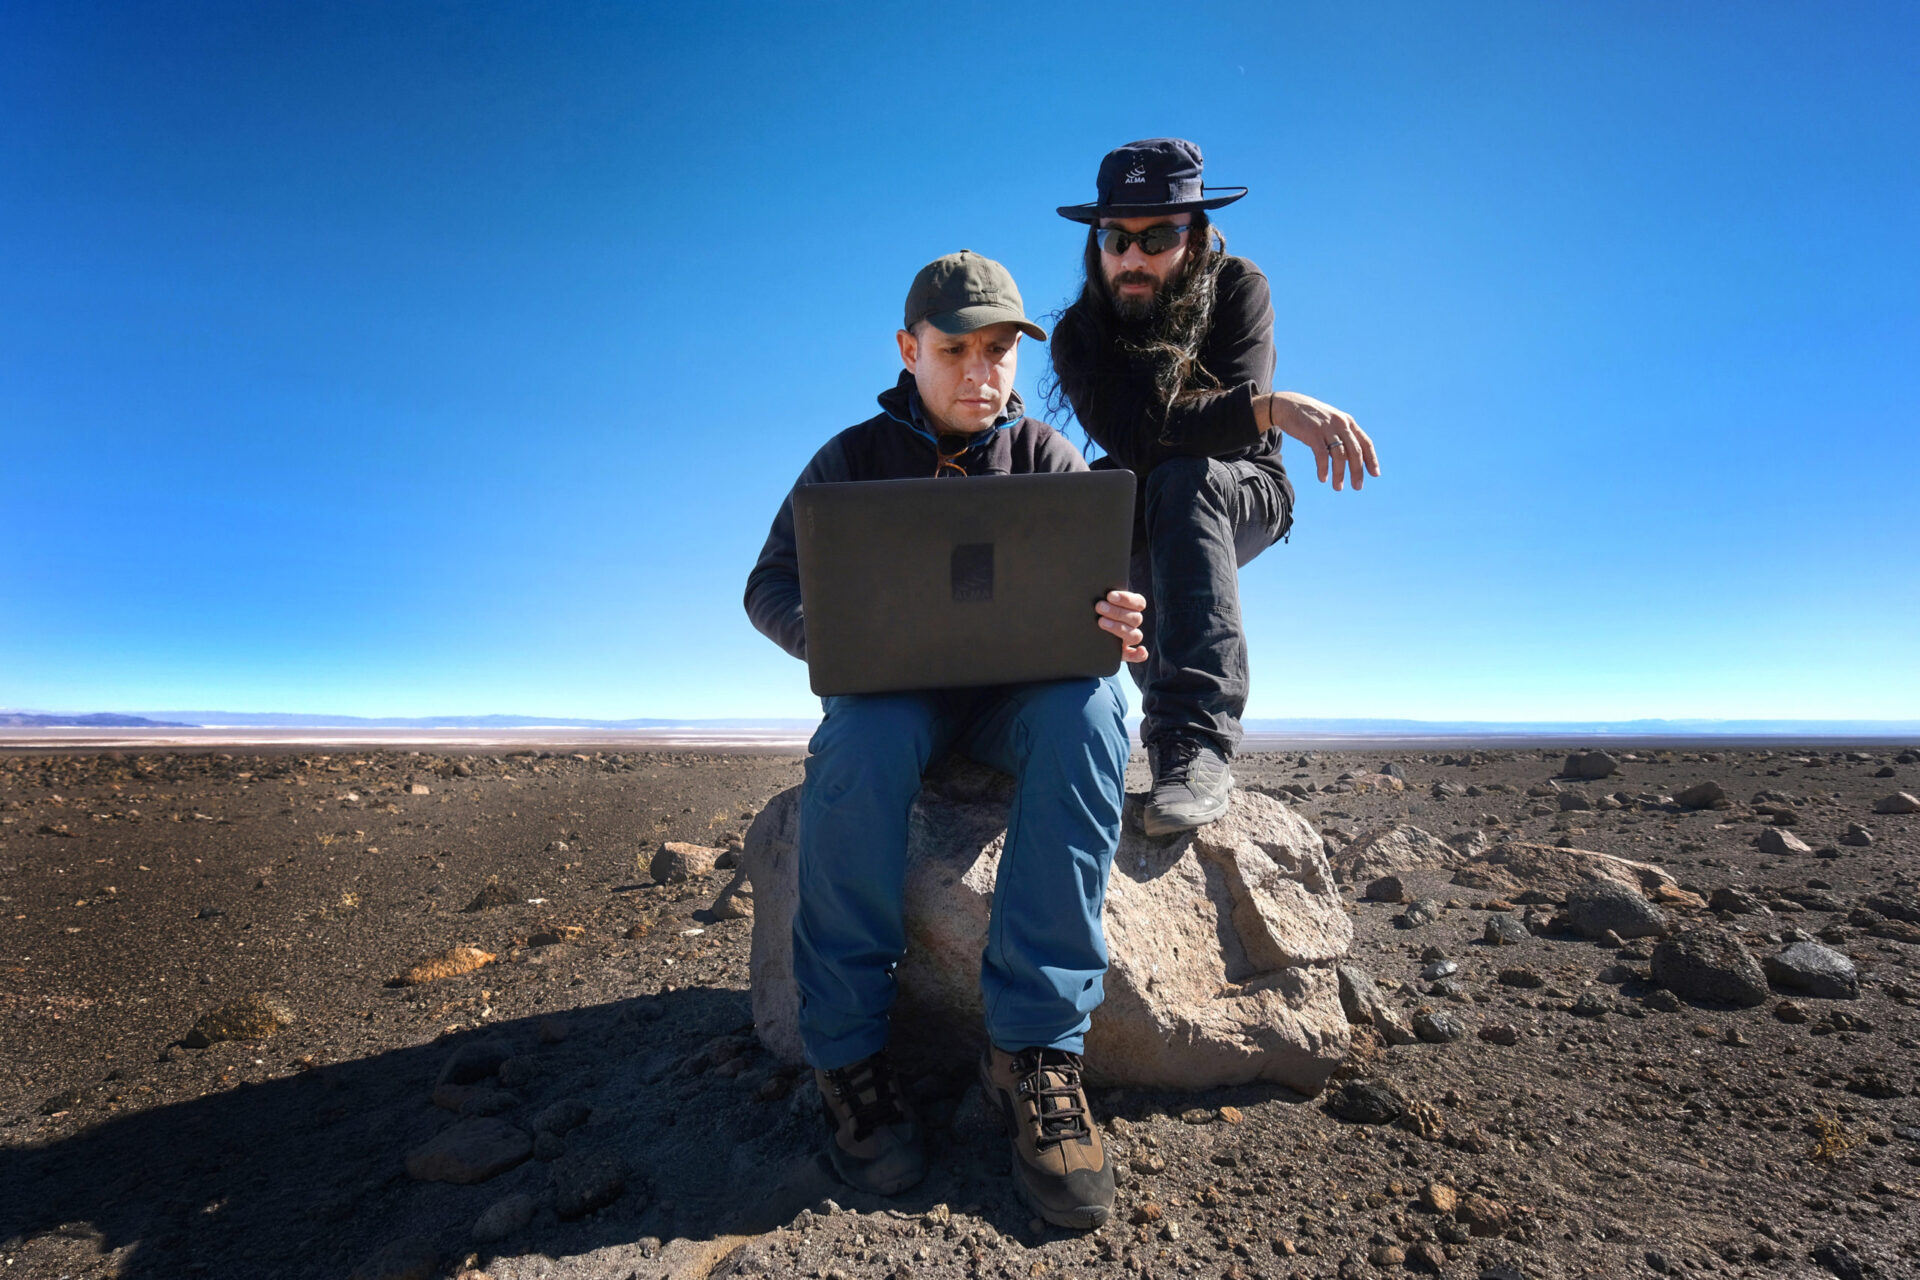 <p>Juan Cortés and Sergio Martin, ALMA astronomers working on the field to determine the alignment of the saywas with the Sun and with different constellations. Credit: R. Bennett - ALMA (ESO/NAOJ/NRAO)</p>
